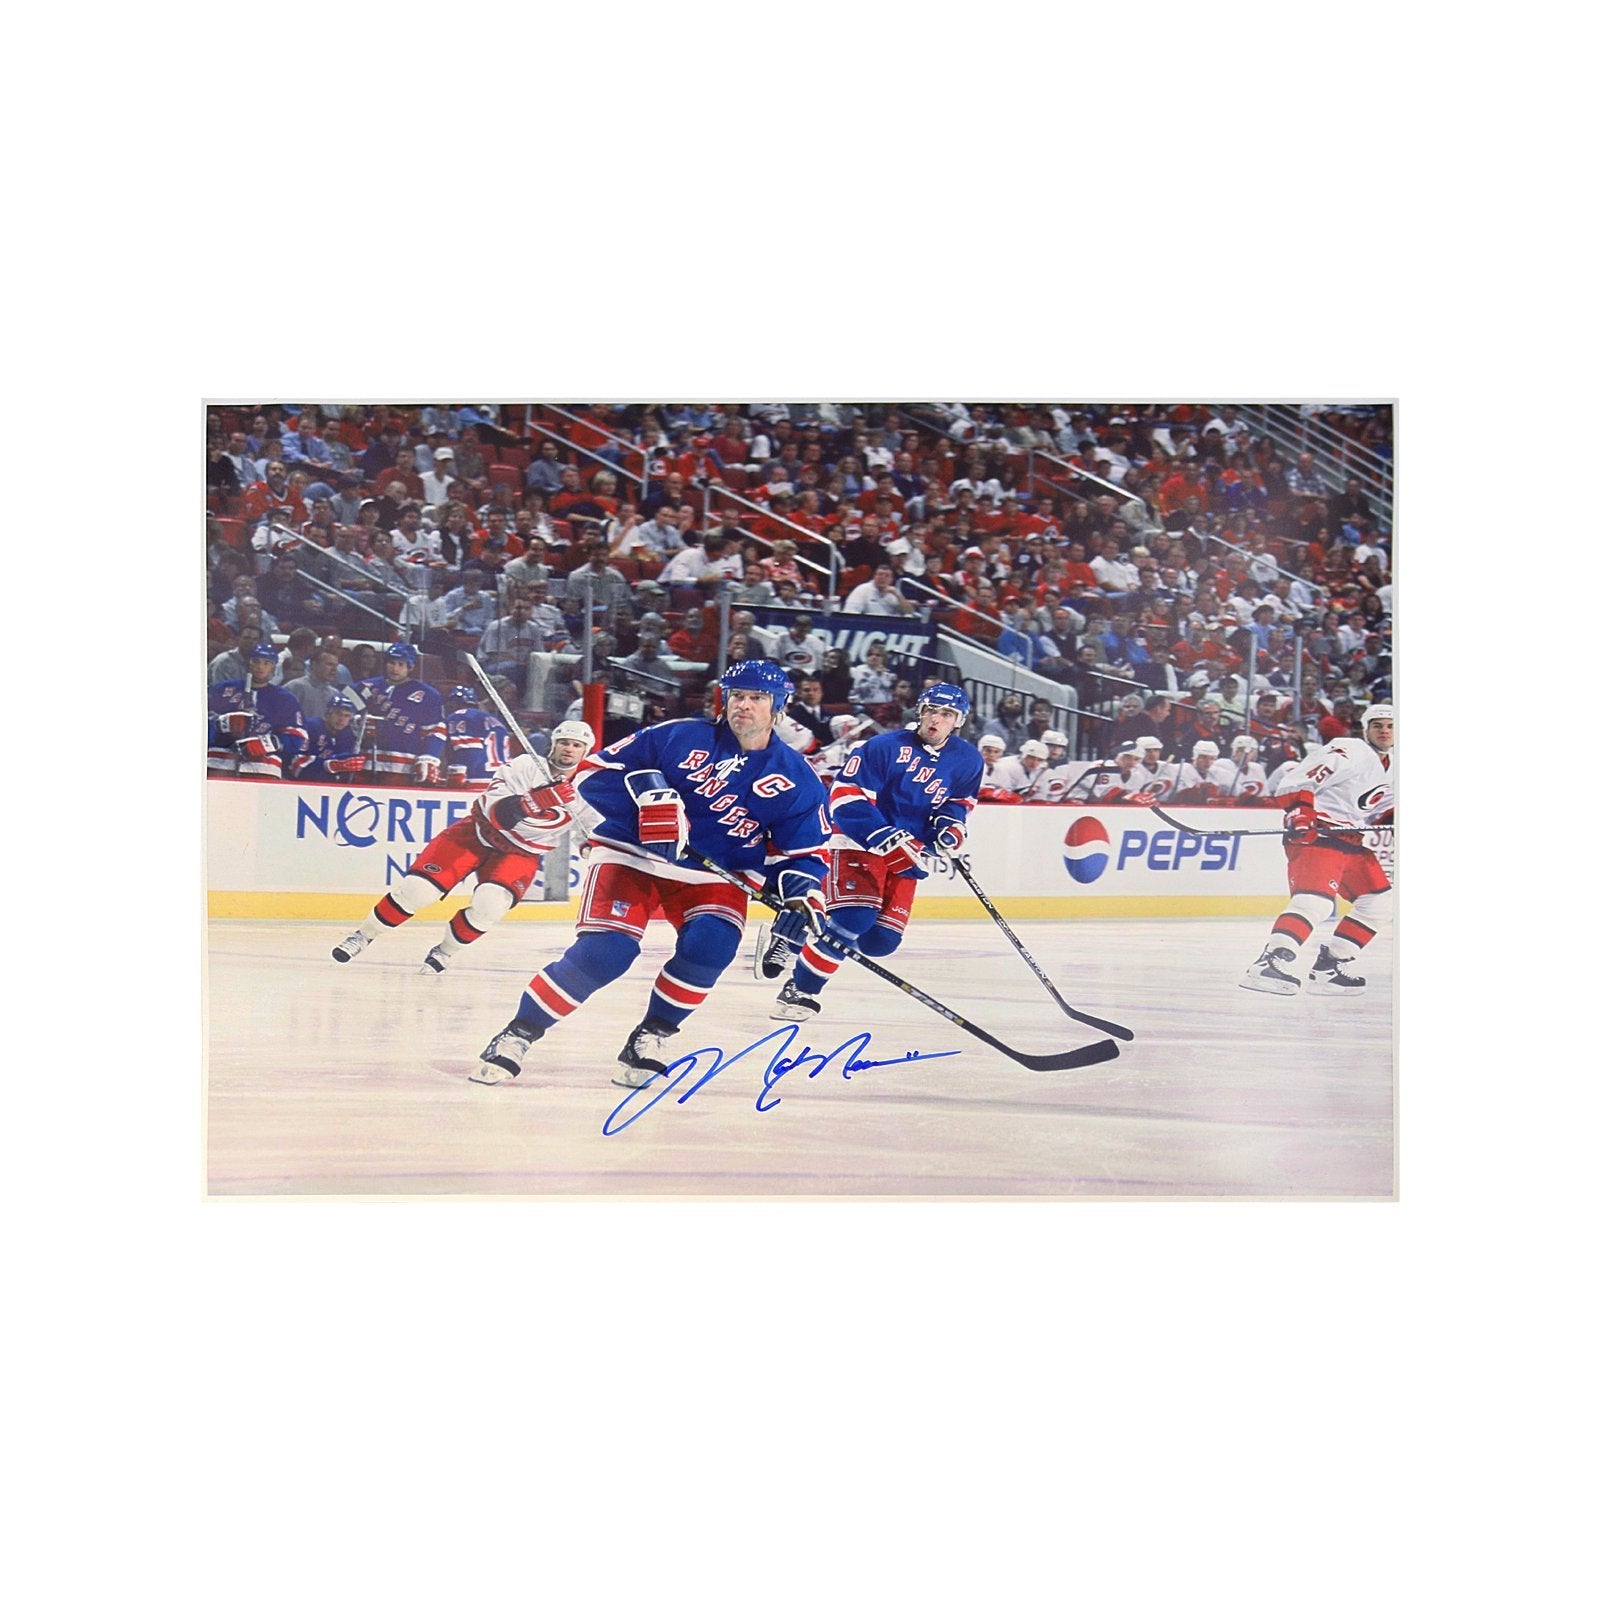 Mark Messier Autographed and Framed White Rangers Jersey